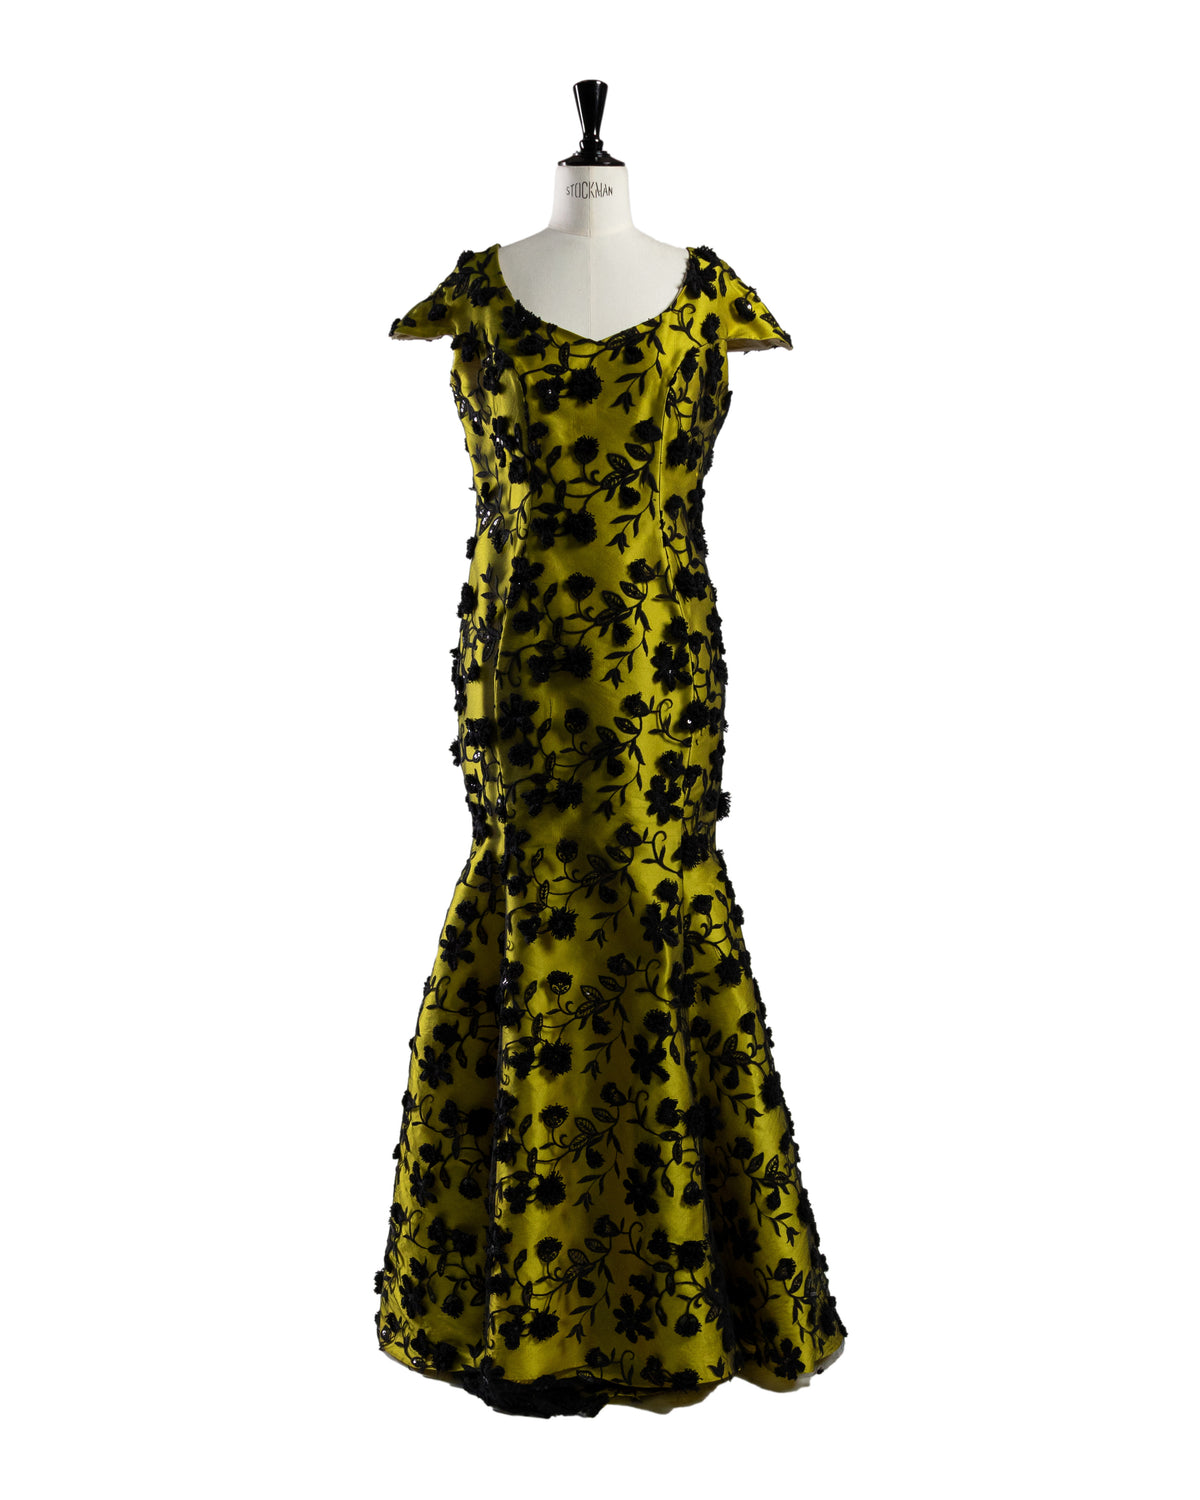 Yellow dress with black lase roses